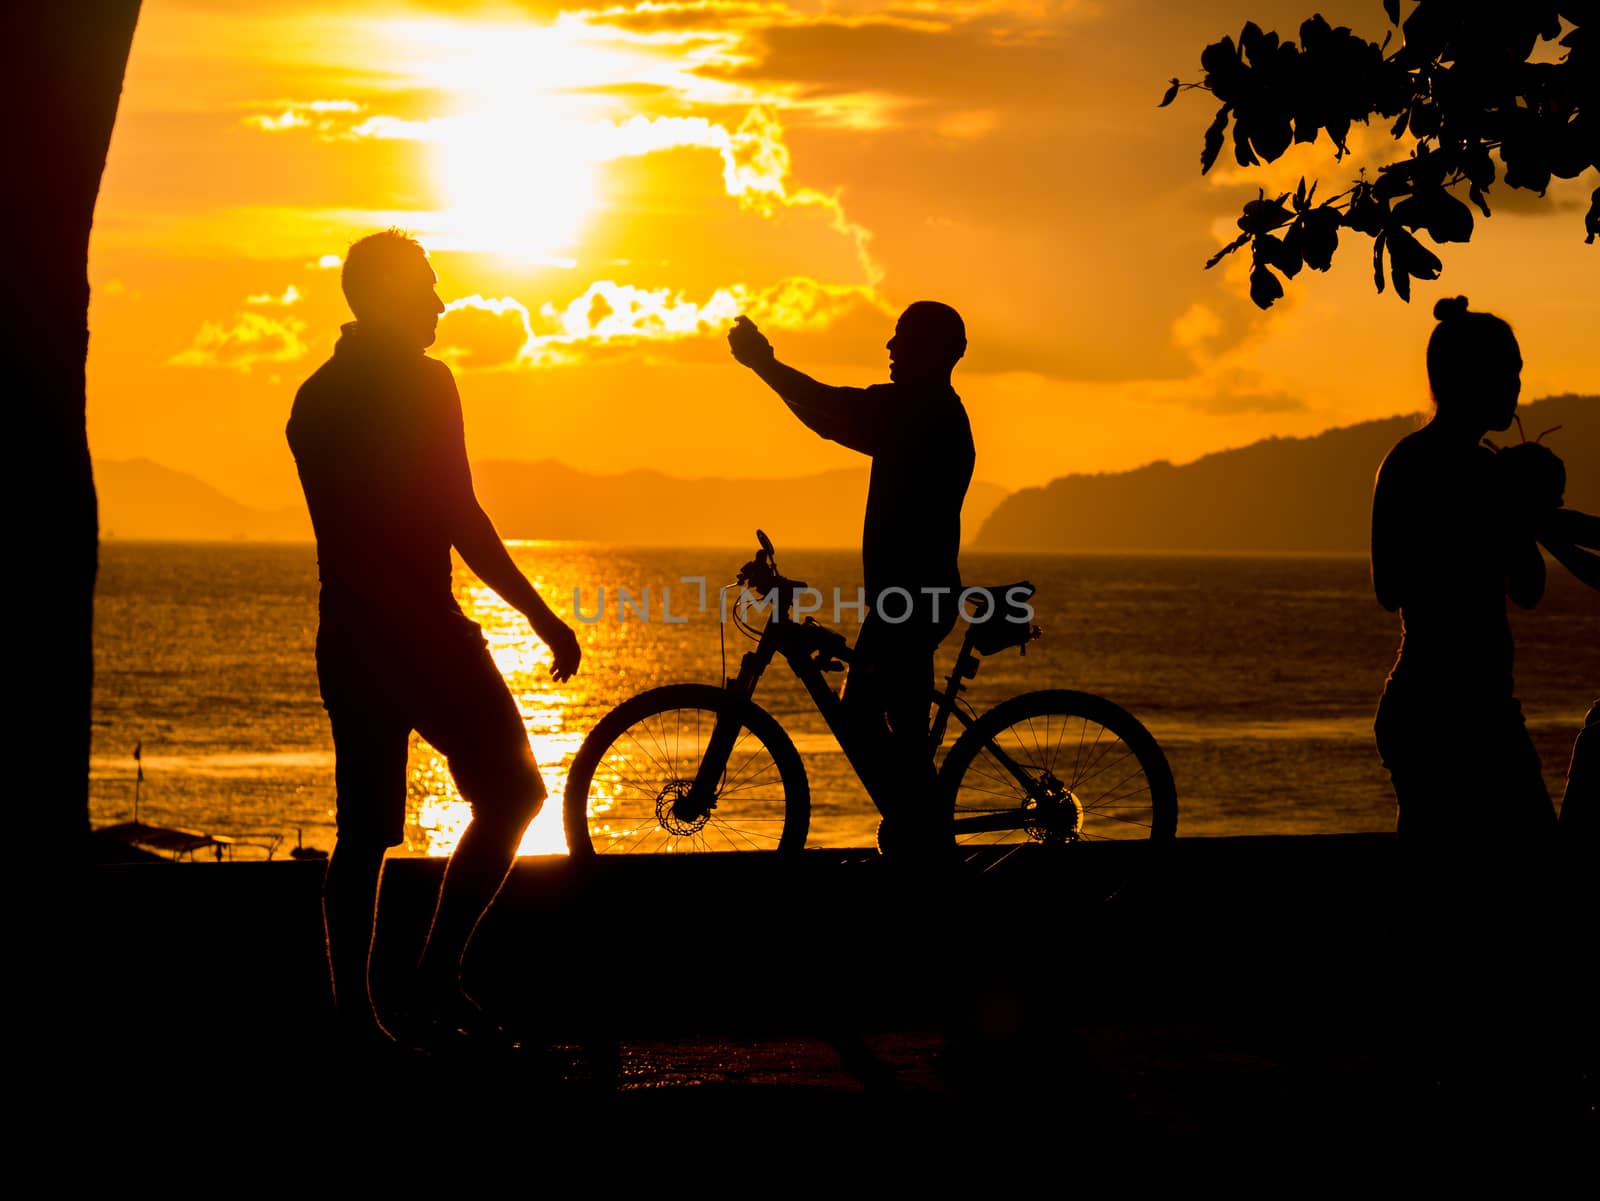 People at Sunset on the beach of Ao Nang in Krabi Thailand